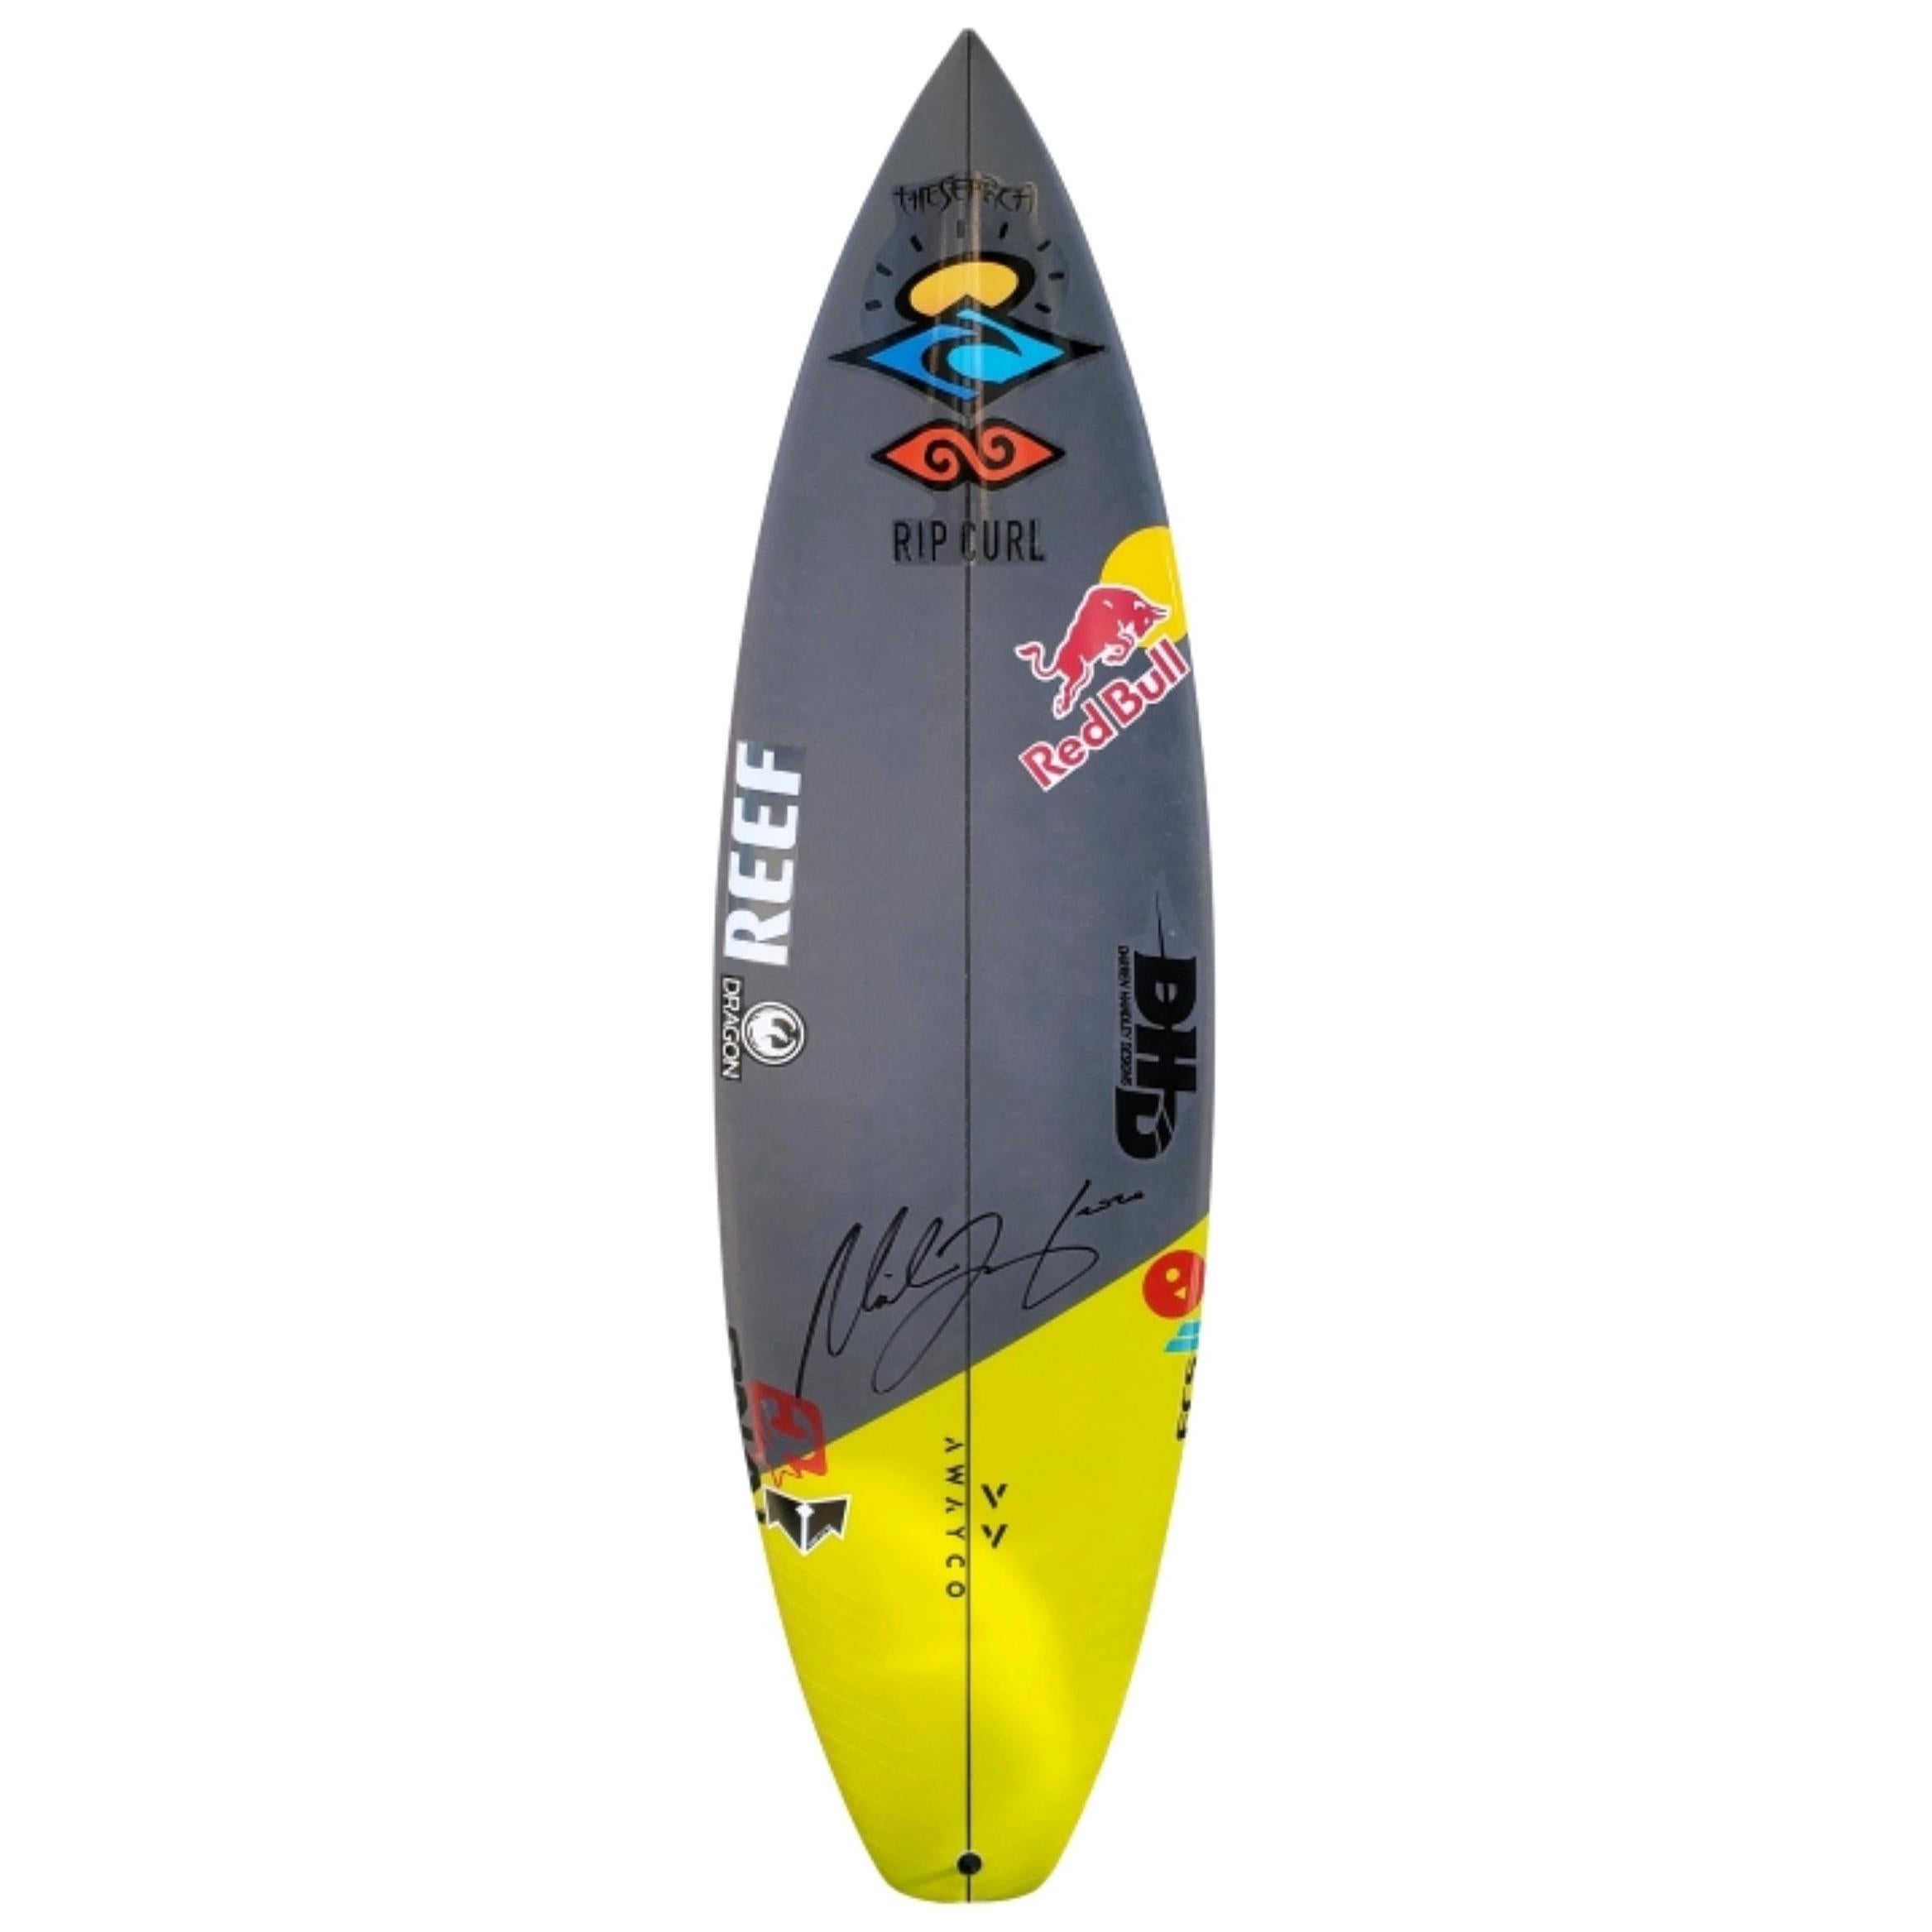 3x World Champion Mick Fanning Personal Surfboard by DHD